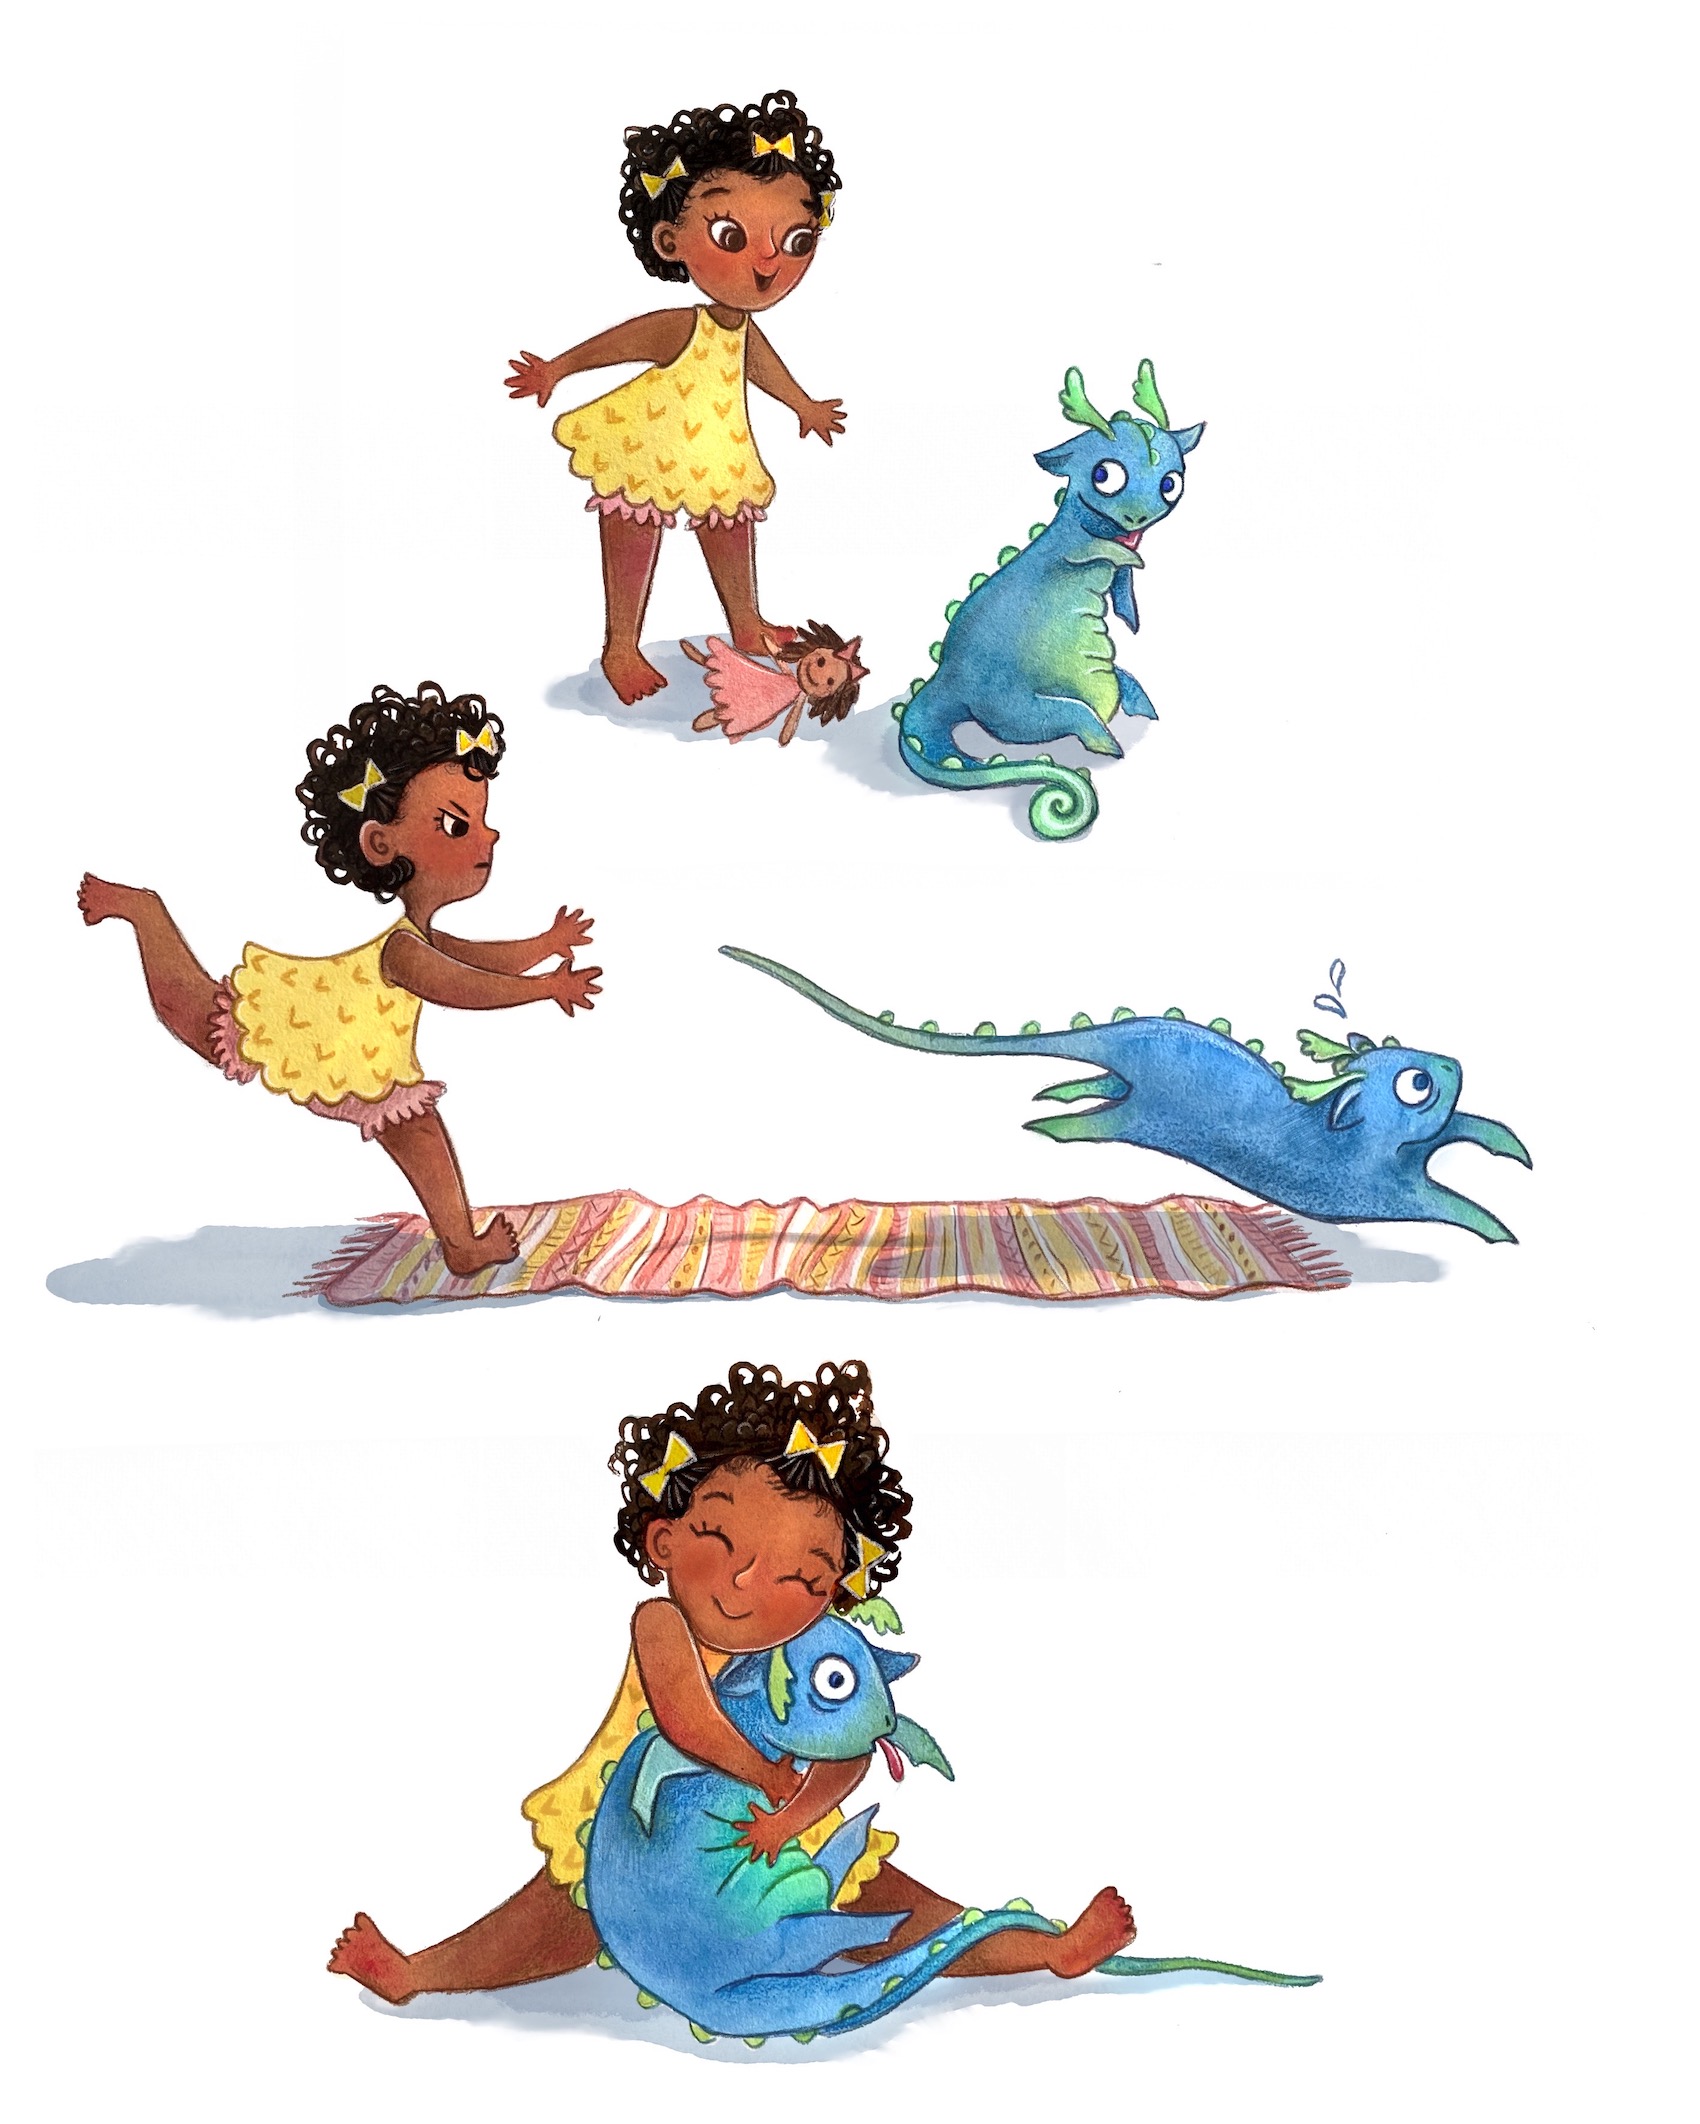 Children's picture book character design of a little black girl and cute baby dragon. Image one shows the girl seeing the dragon and dropping her doll in surprised delight. Image two shows the girl chasing the dragon across a rug. Image three shows the girl cuddling the baby dragon, giving him a big squeeze hug.